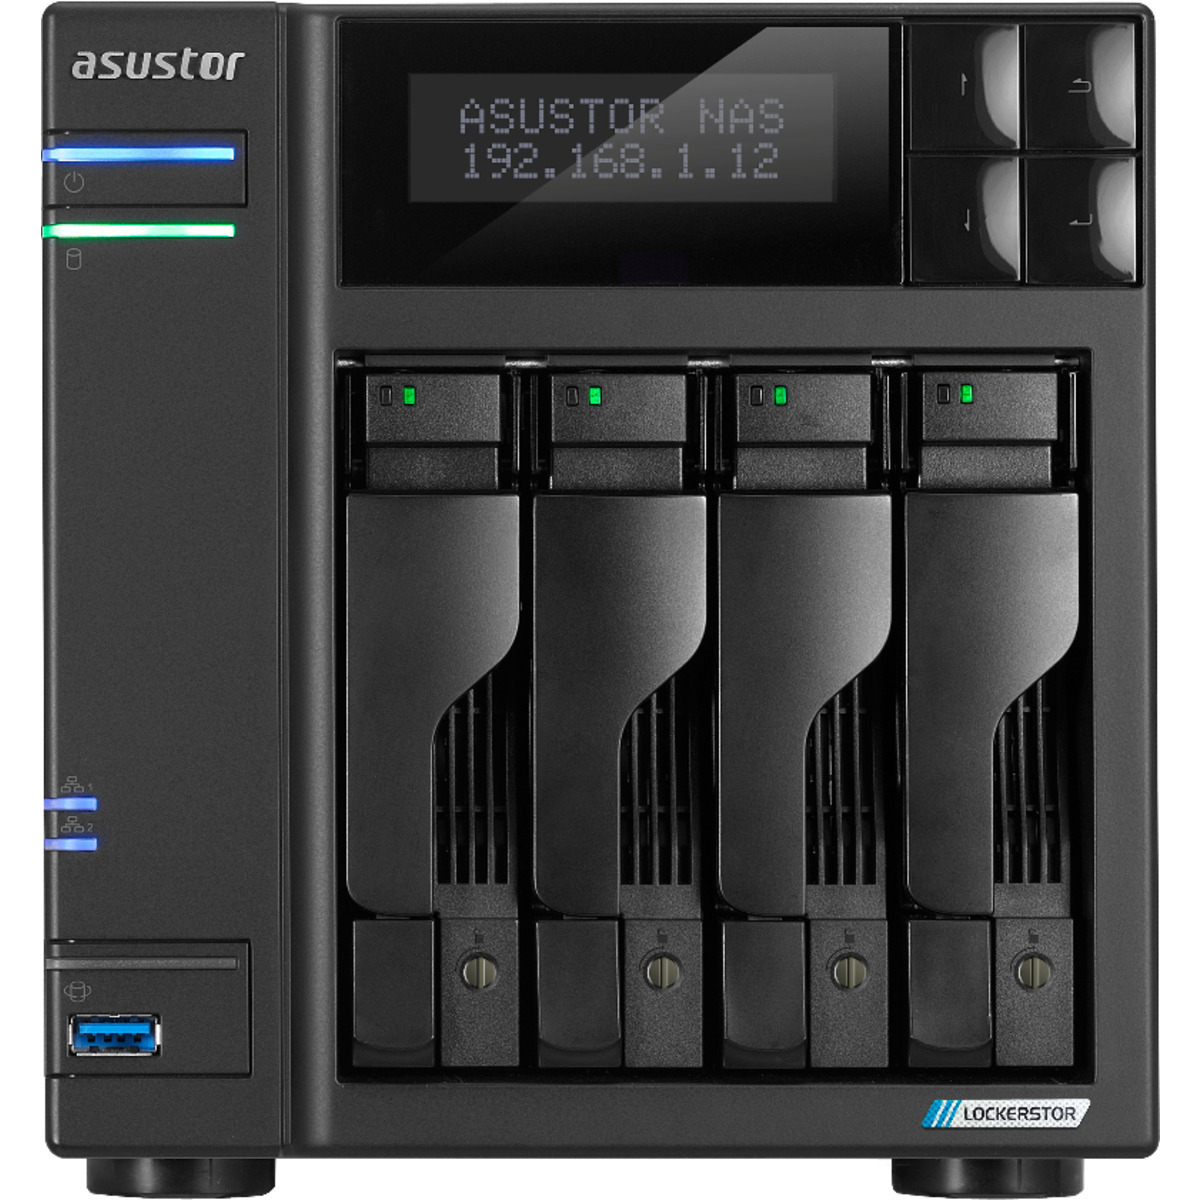 ASUSTOR LOCKERSTOR 4 Gen2 AS6704T 32tb 4-Bay Desktop Multimedia / Power User / Business NAS - Network Attached Storage Device 4x8tb Seagate IronWolf Pro ST8000NT001 3.5 7200rpm SATA 6Gb/s HDD NAS Class Drives Installed - Burn-In Tested - ON SALE - FREE RAM UPGRADE LOCKERSTOR 4 Gen2 AS6704T